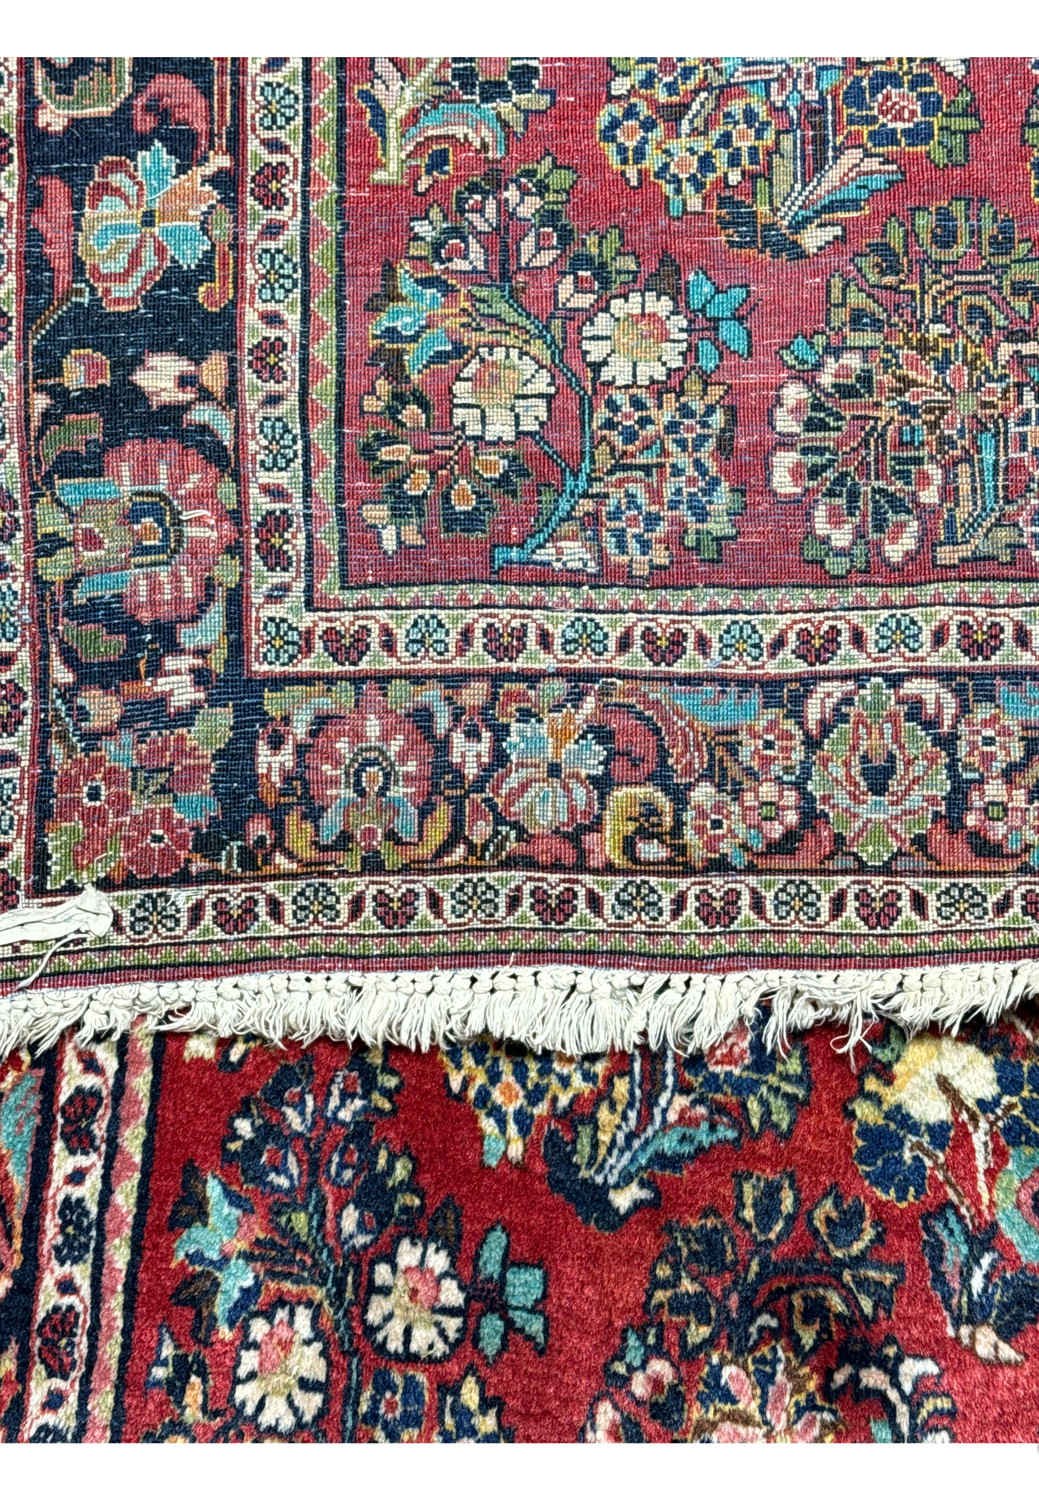 Detailed view of the Persian Sarough 4x6 rug's edge, showing the fine fringe and border patterns